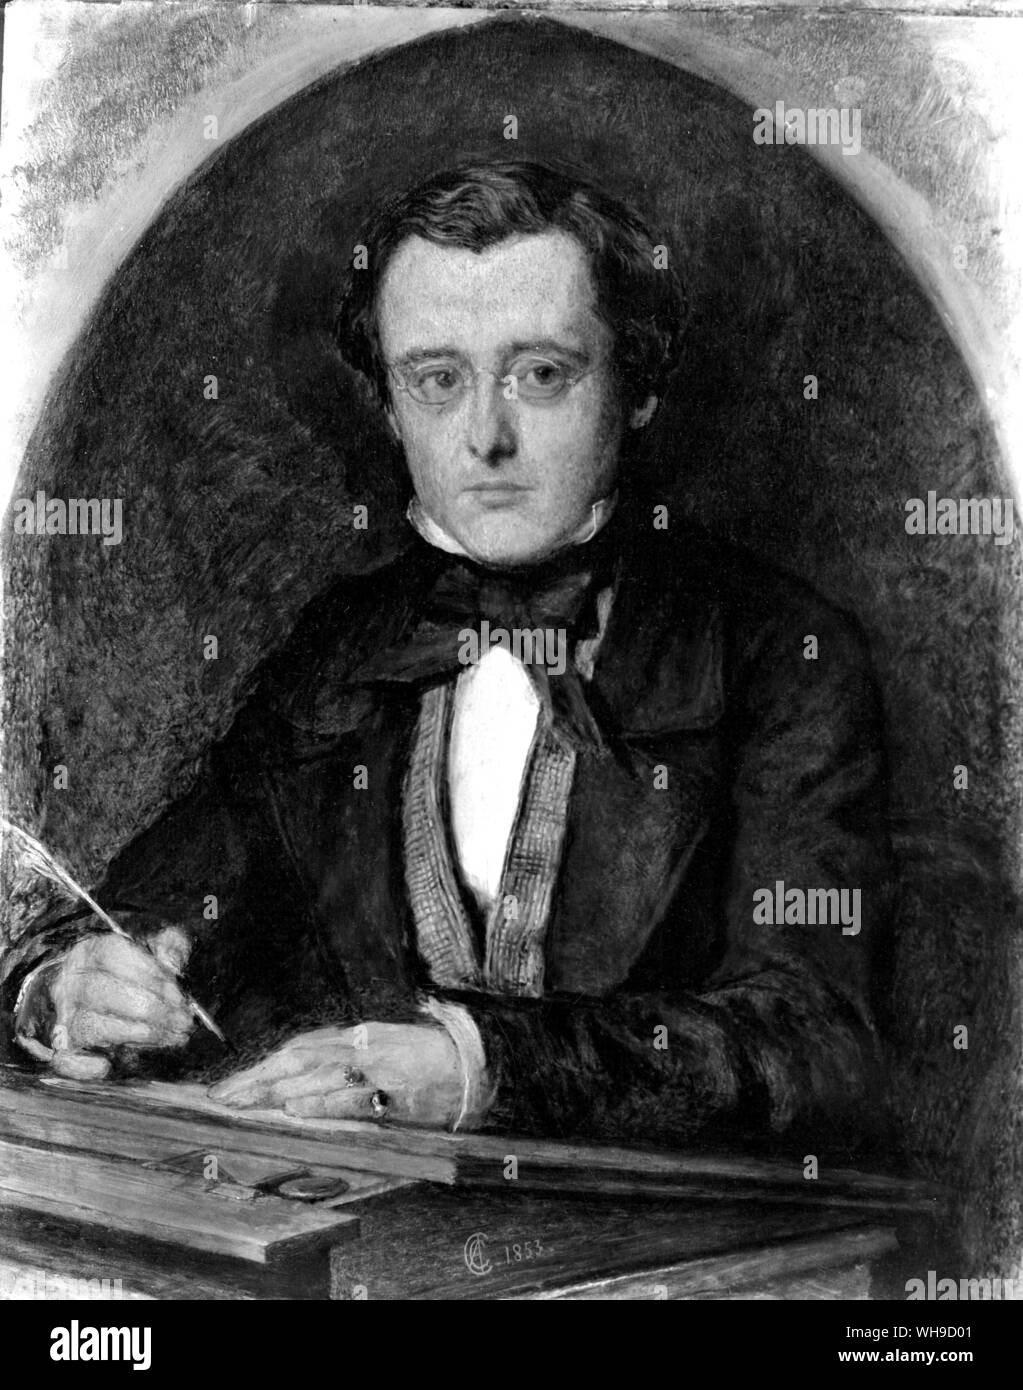 (William) Wilkie Collins (1824-1889). English author of mystery and suspense novels. He wrote 'The Woman in white', 1860. Stock Photo